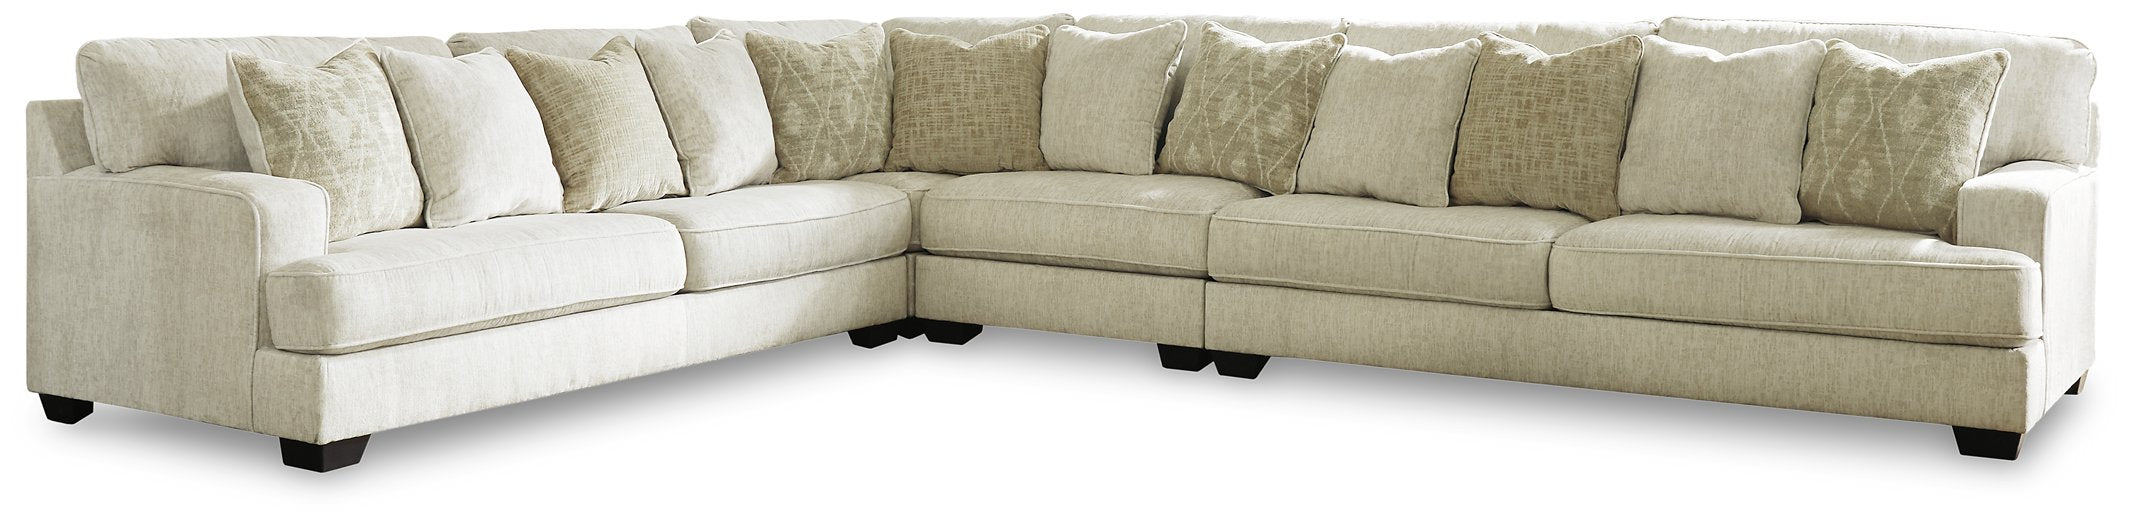 Rawcliffe Upholstery Package